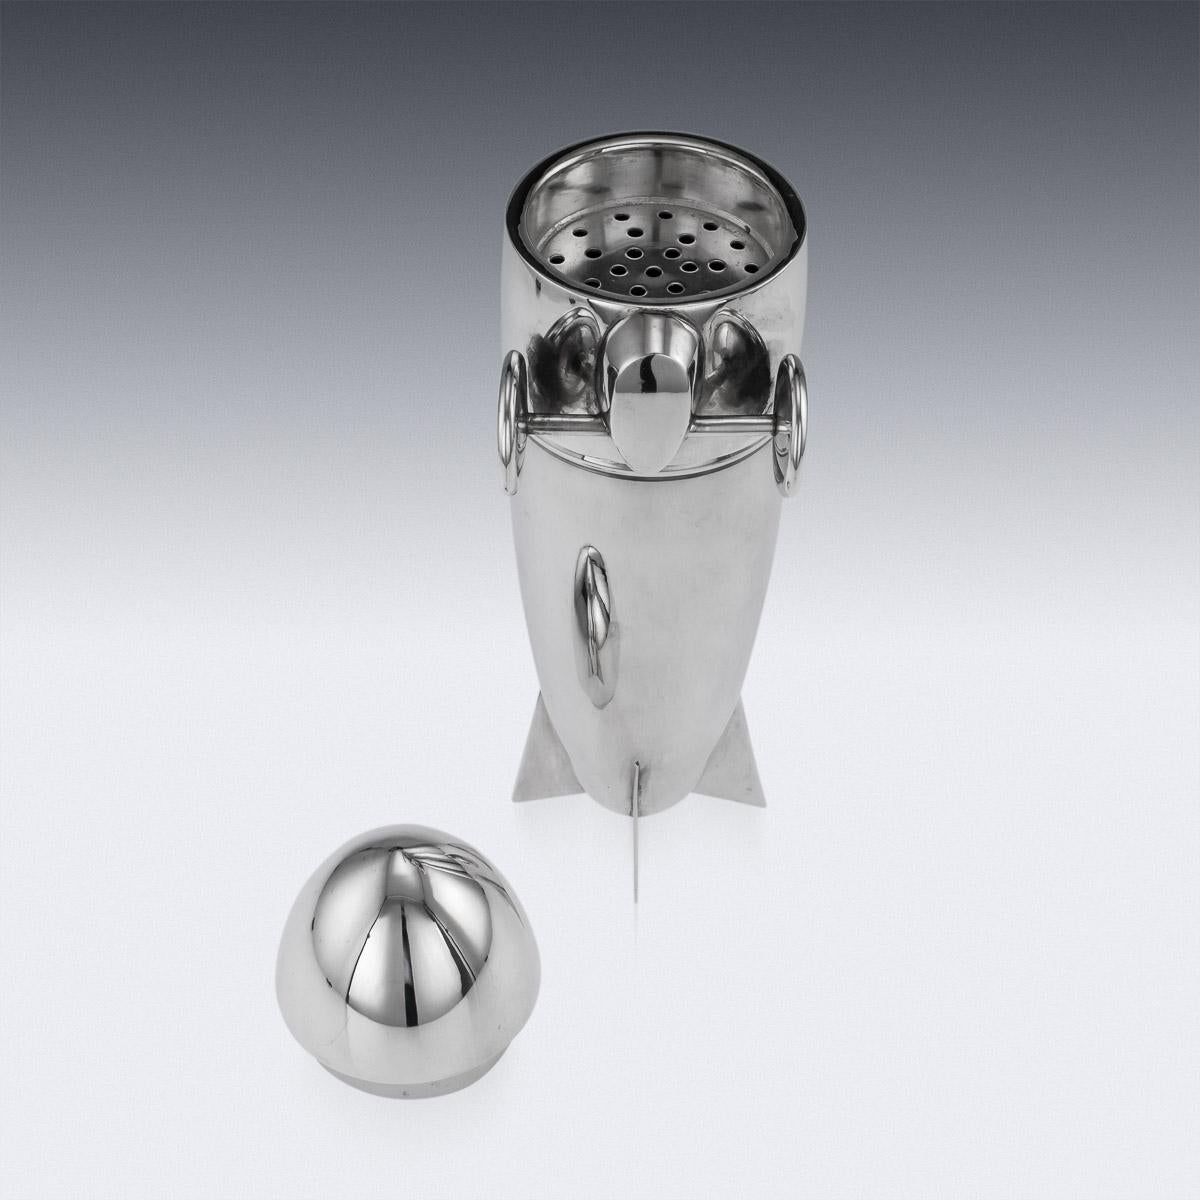 20th Century Art Deco Silver Plated Zeppelin Cocktail Shaker 1